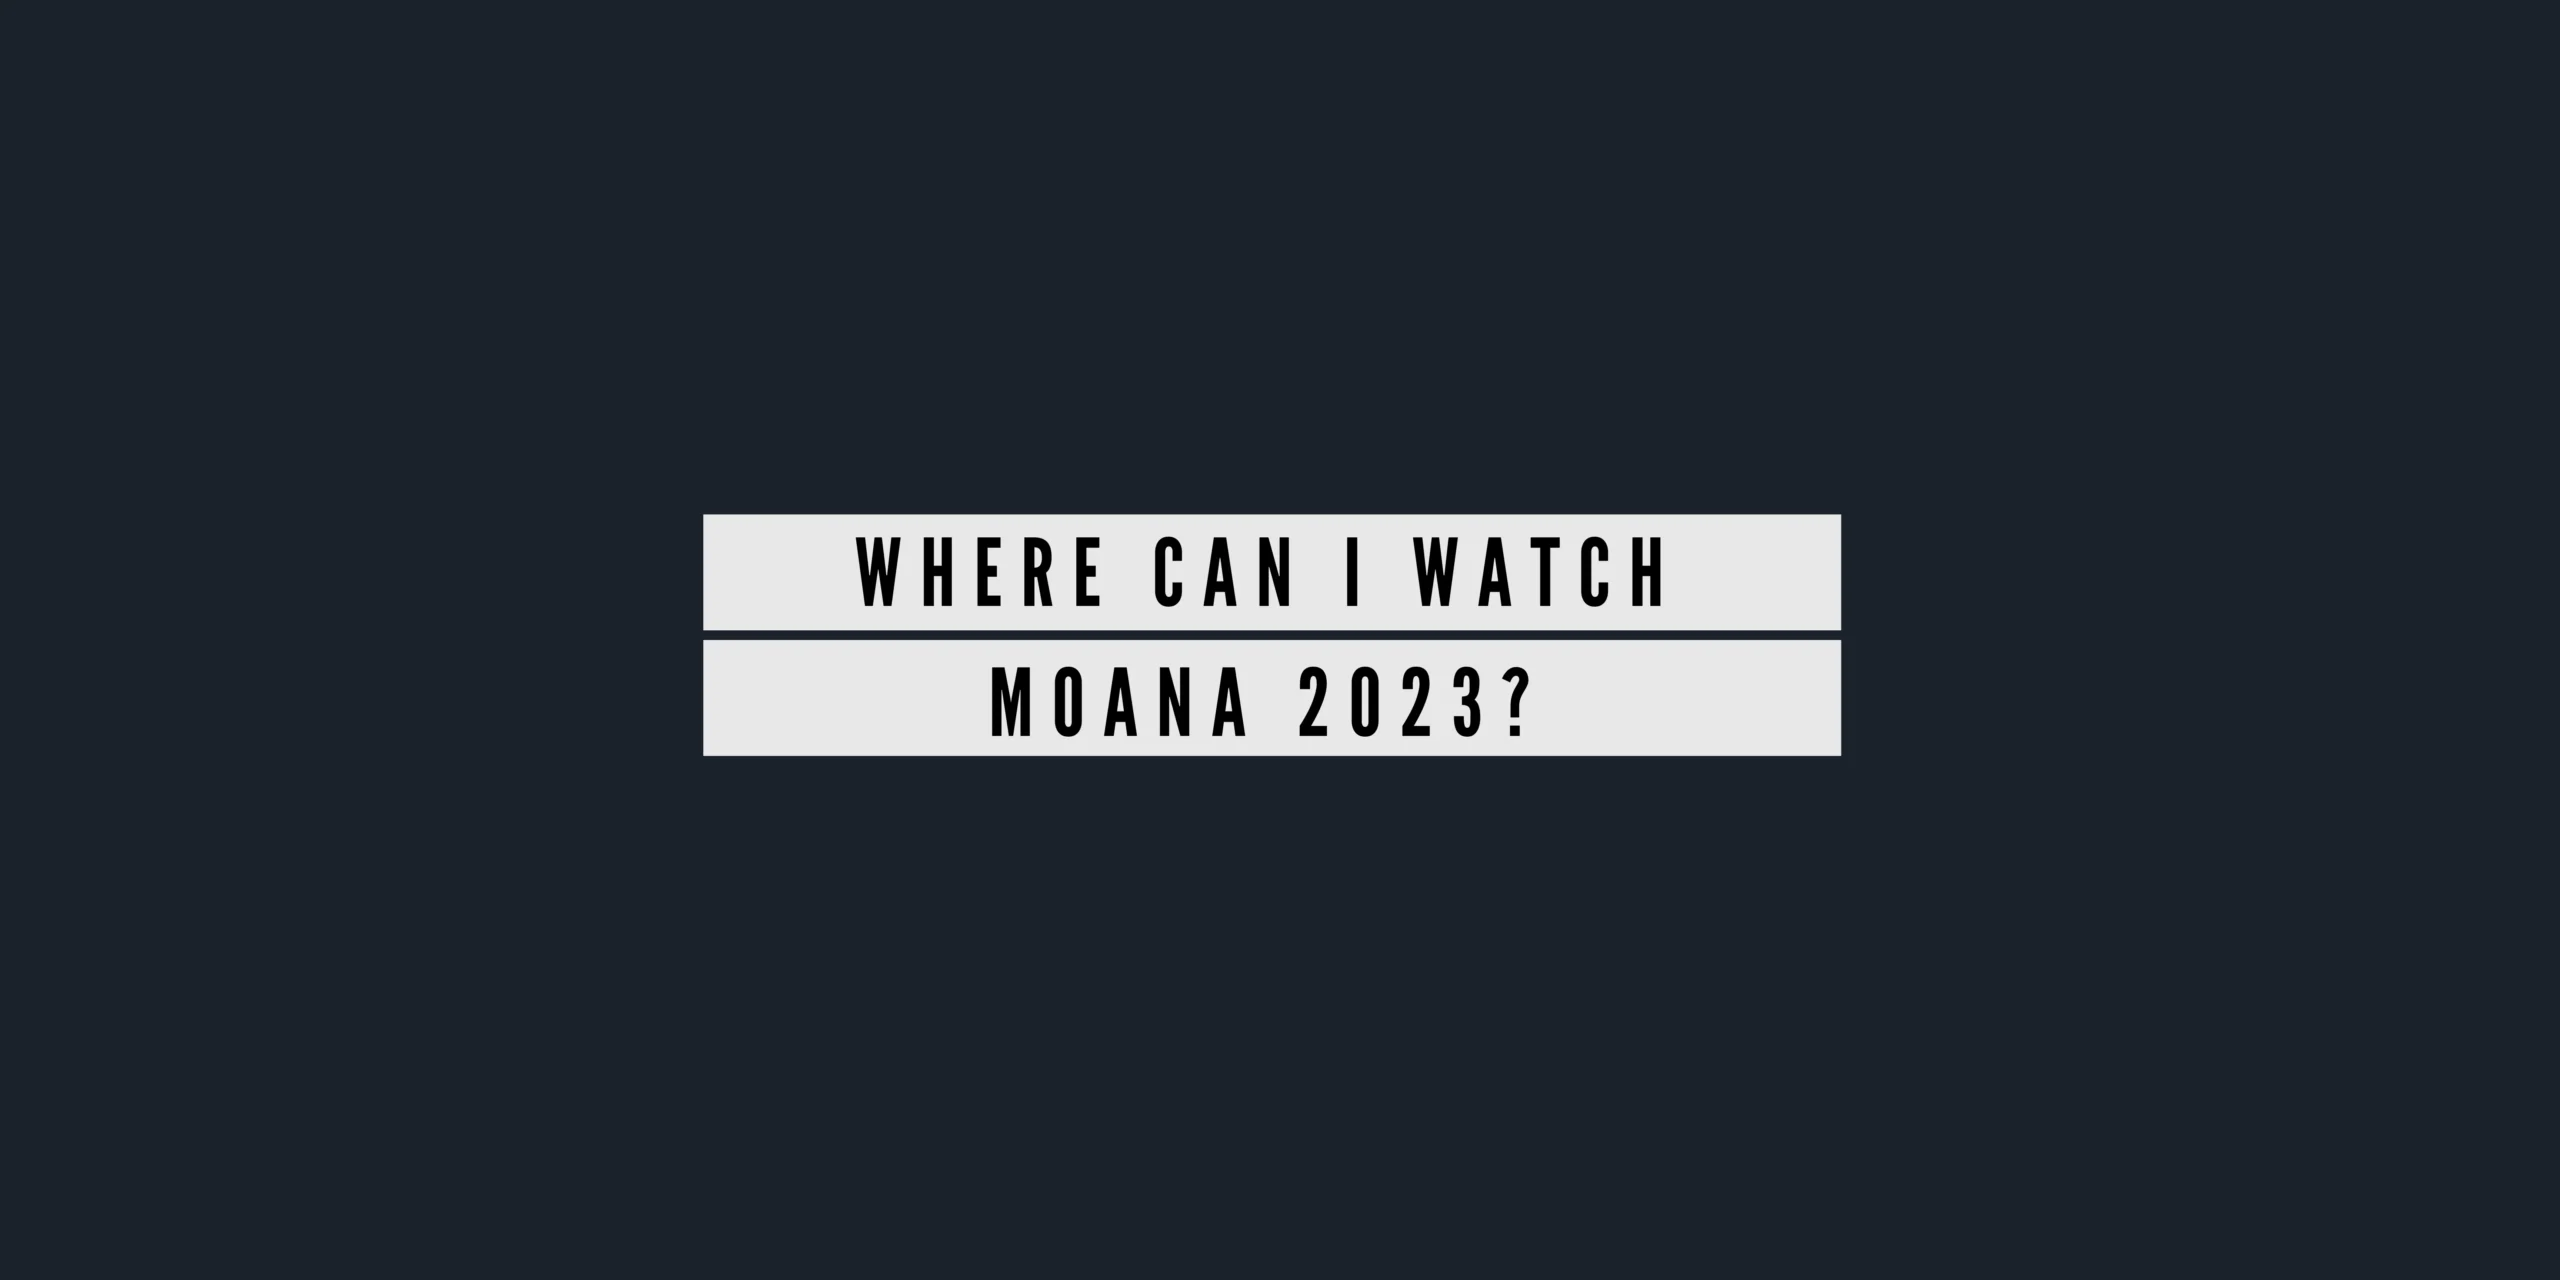 Where to Watch Moana in 2023